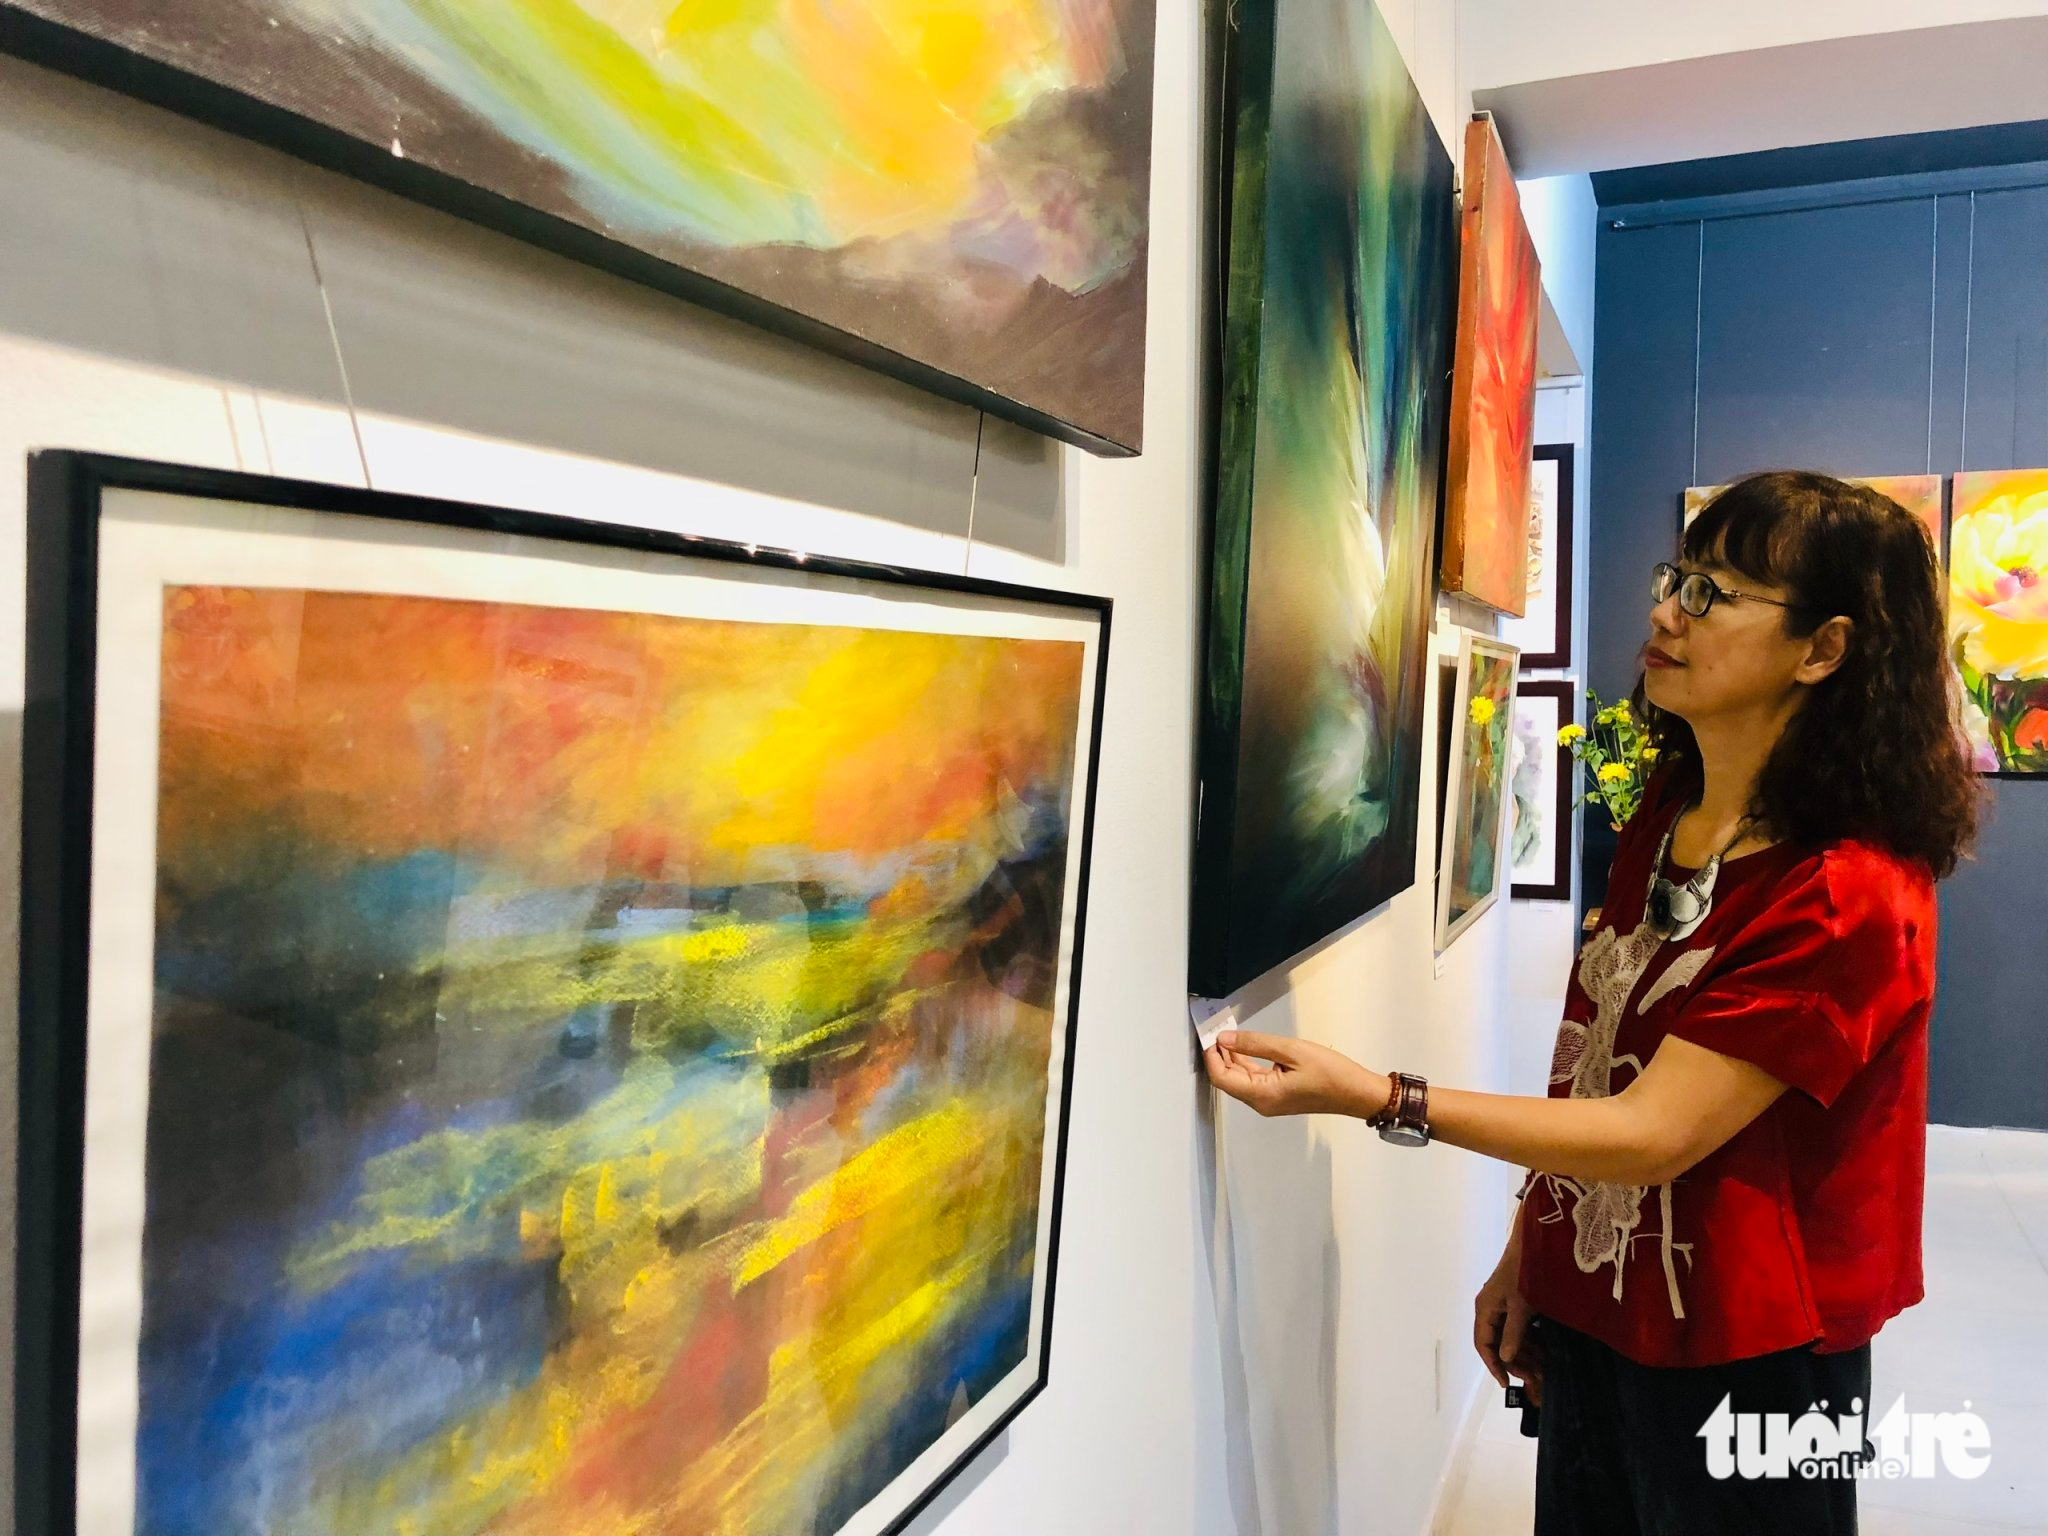 Painter Tran Thuy Linh looks at one of her spring-themed paintings, which are exhibited at the premises of the Ho Chi Minh City Fine Arts Association in District 3, Ho Chi Minh City, January 8, 2023. Photo: Hoai Phuong / Tuoi Tre